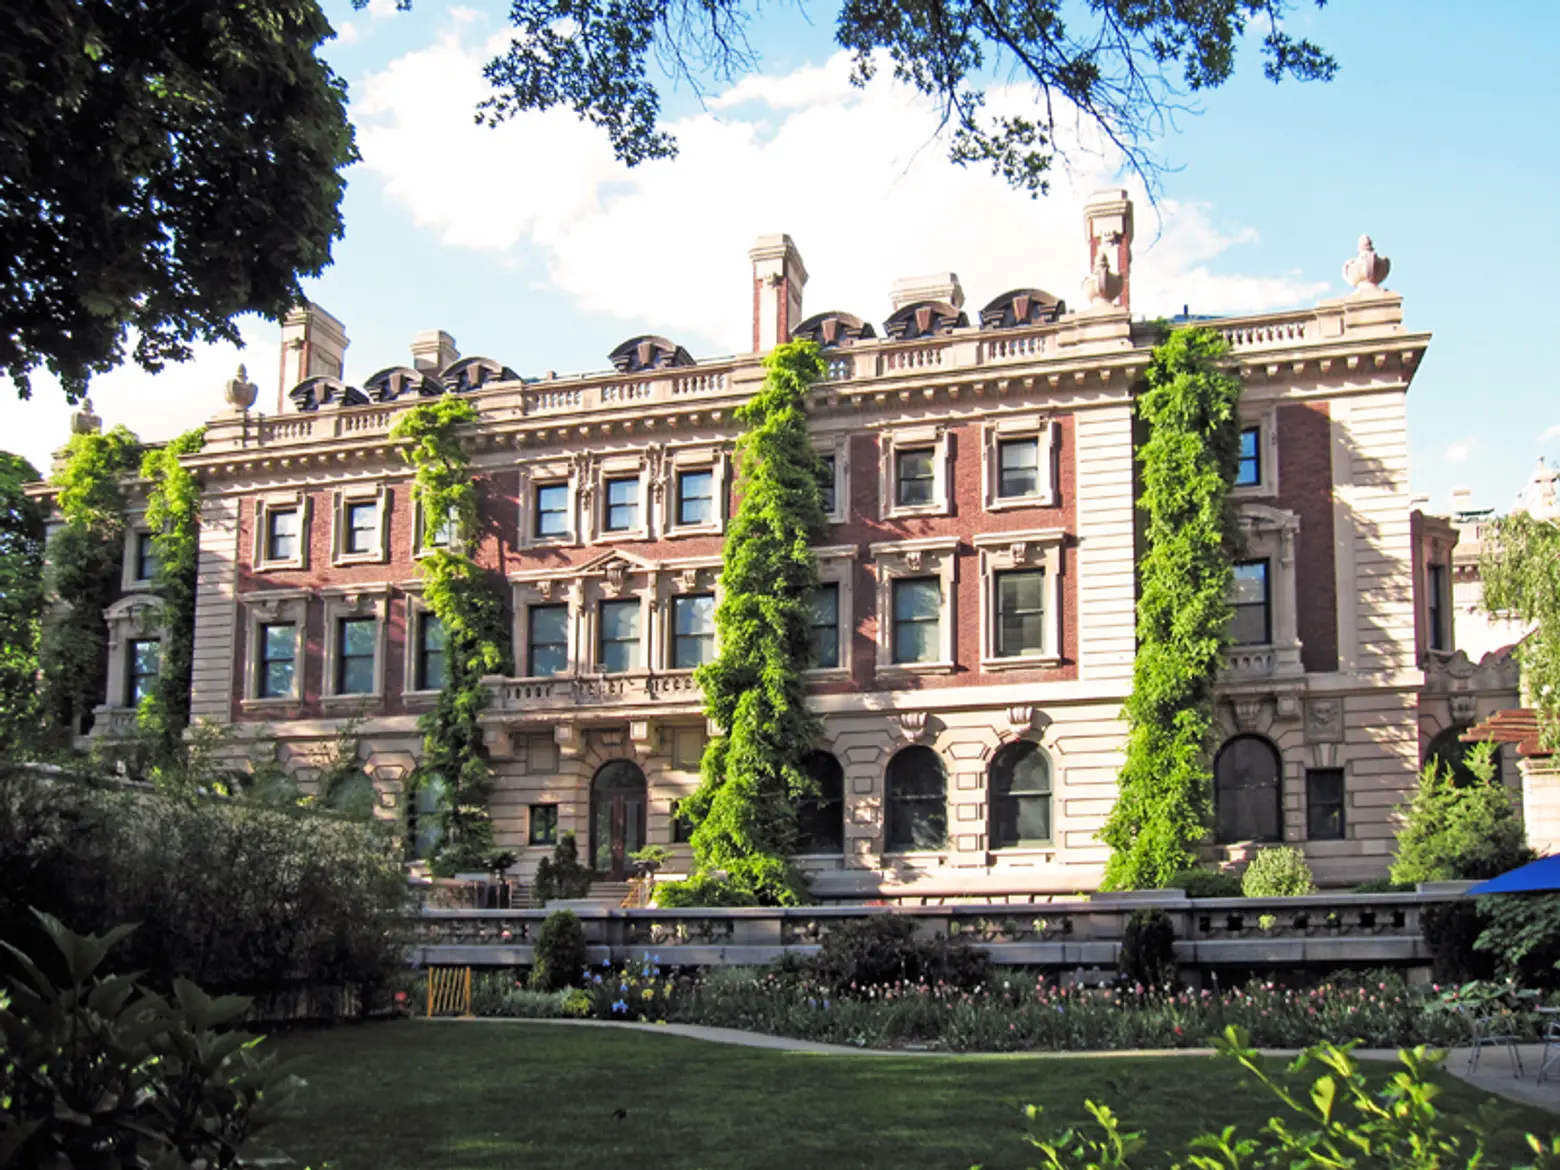 The Carnegie Mansion, now the Cooper-Hewitt National Design Museum.